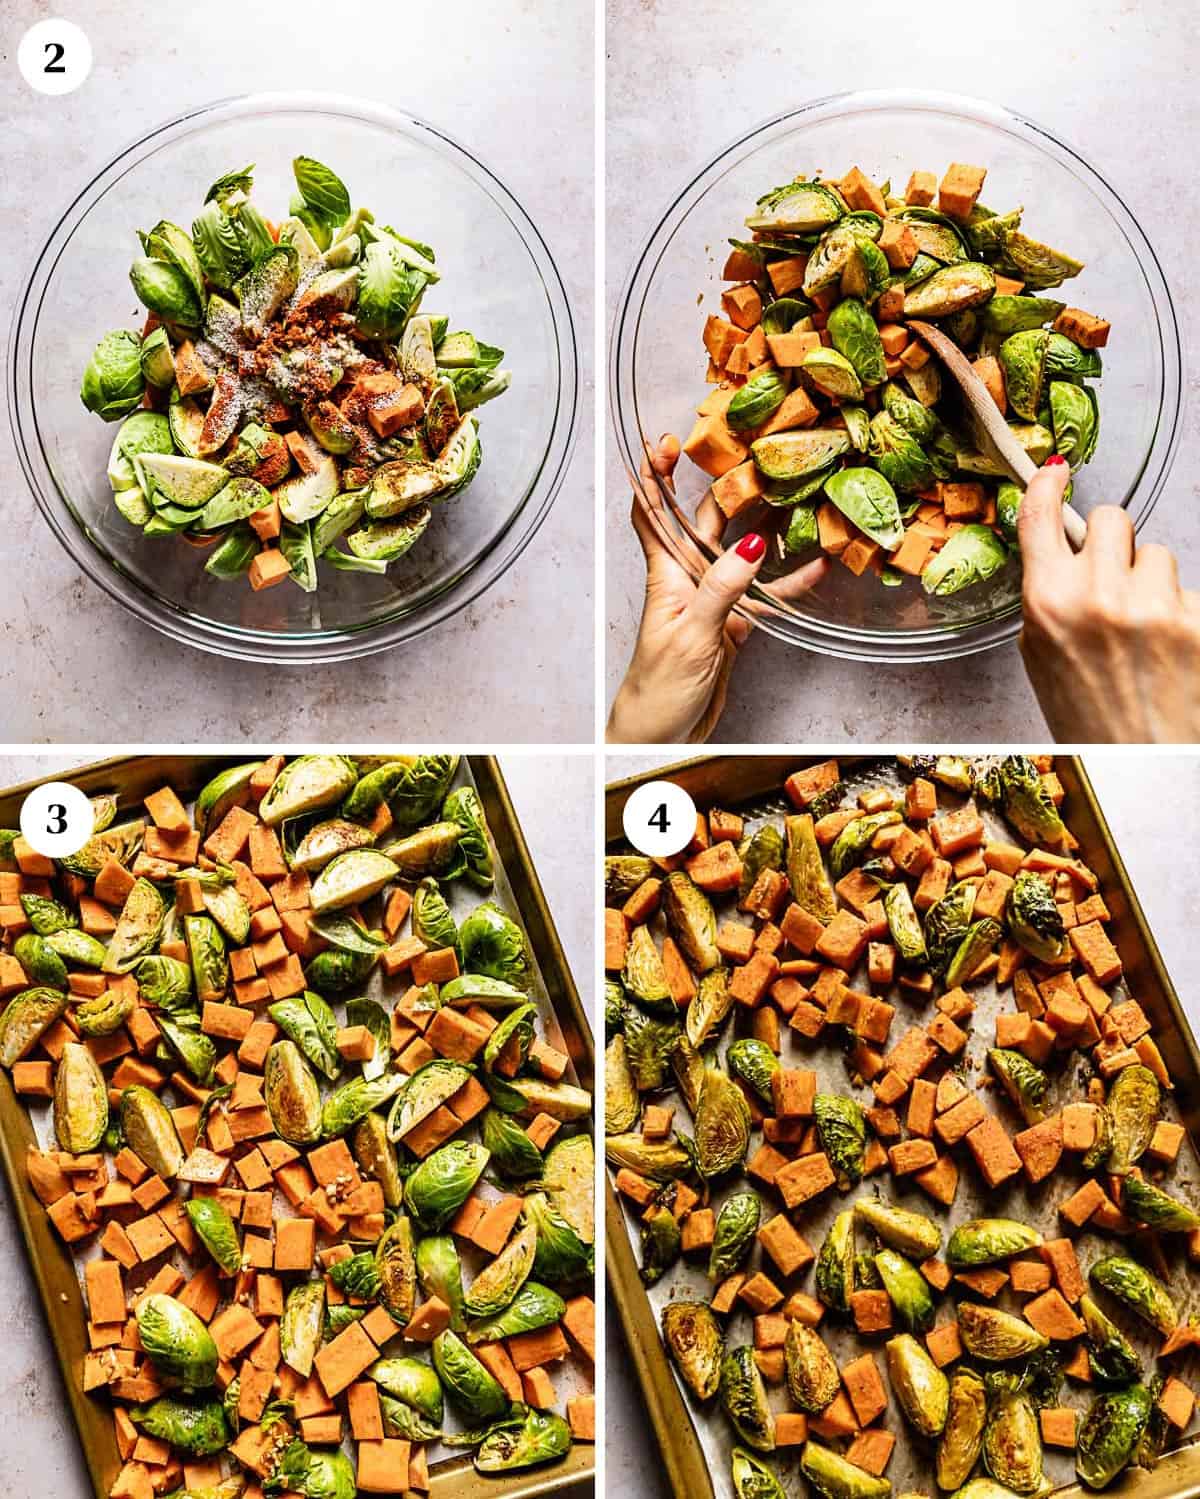 A collage of images showing how to roast brussel sprouts and sweet potatoes.